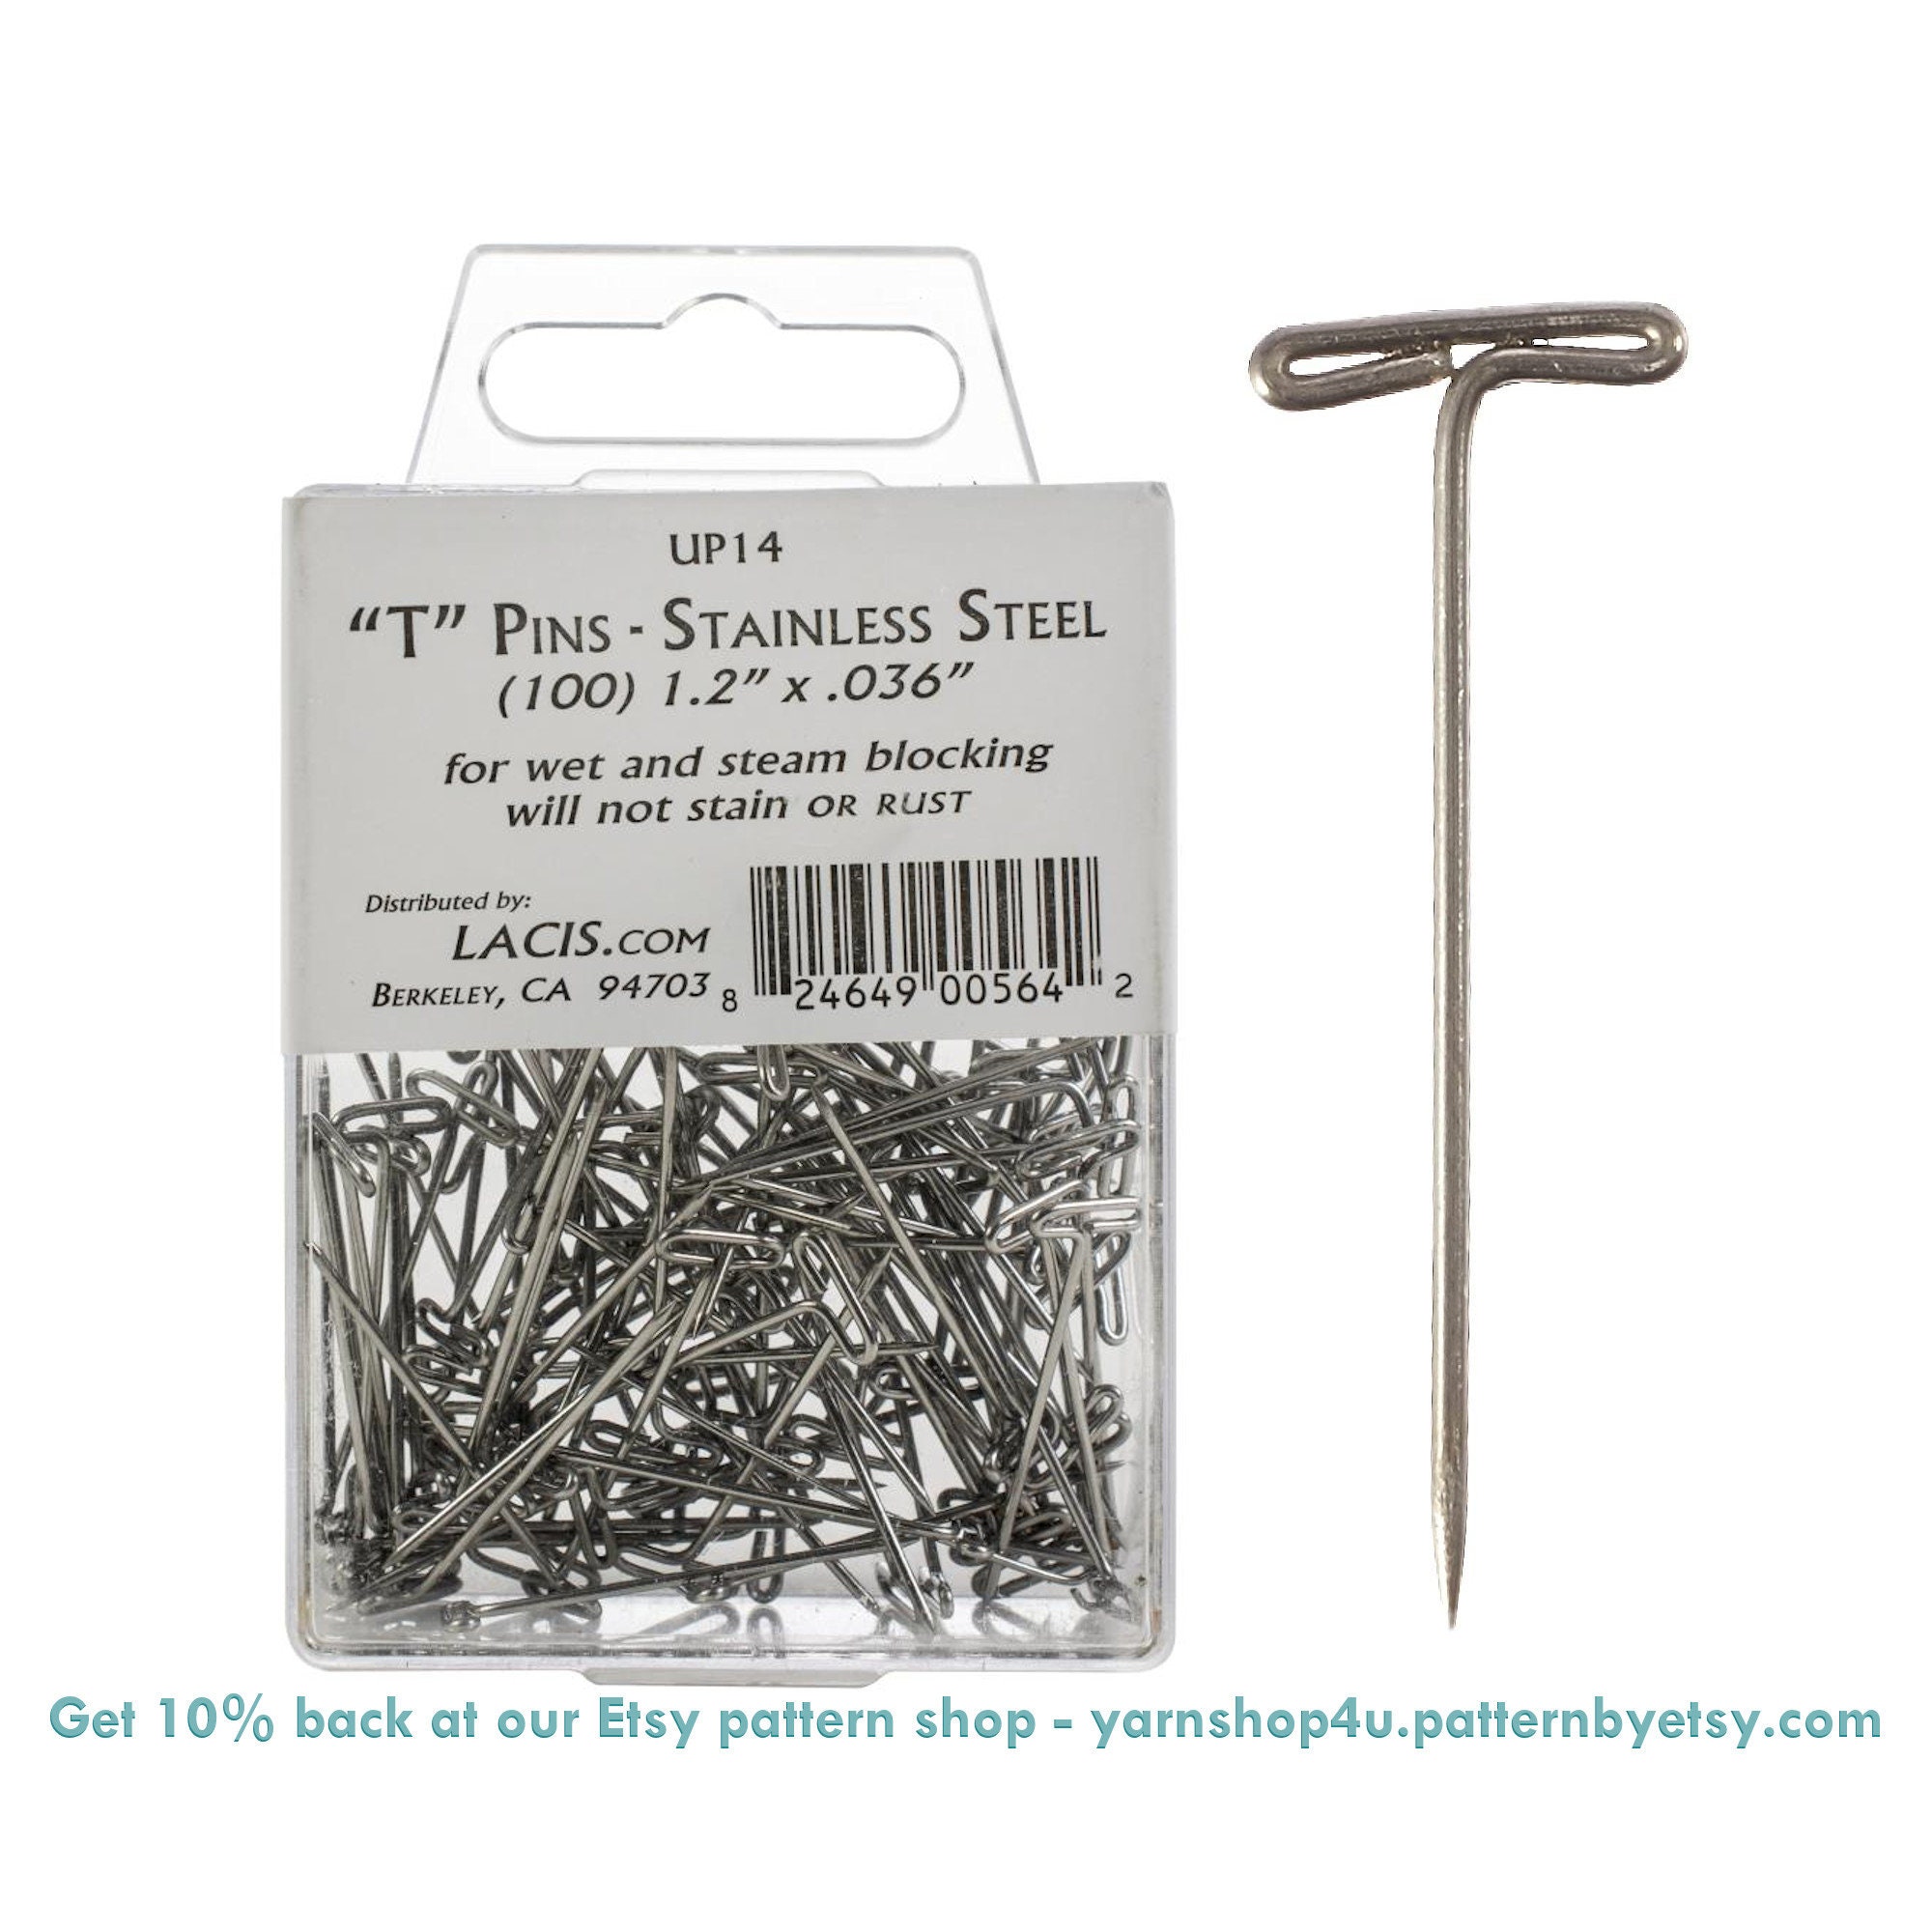 Grosun 400pcs 38mm/1.5inch Stainless Steel T-Pins Sewing Pins for Knitting and Blocking 